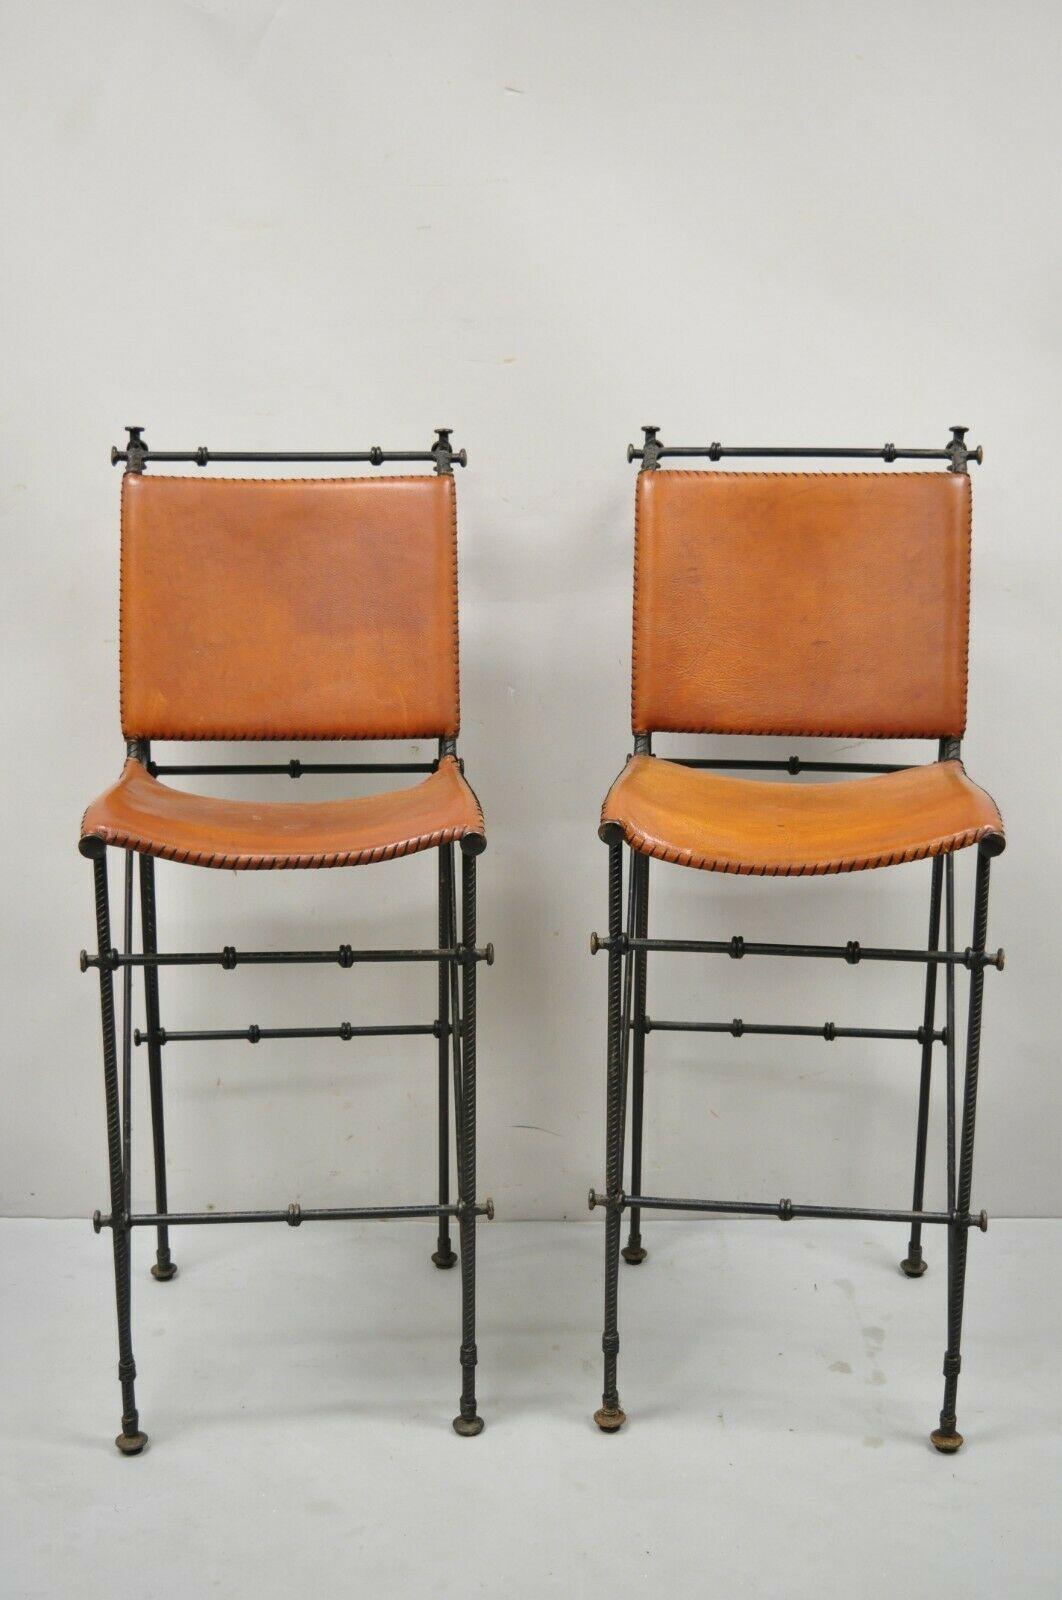 Spanish Modern Orange Burnished Leather Wrought Iron Bar Stools after Ilana Goor - a Pair. Set features orange burnished high quality leather backs and seats, heavy wrought iron frames, rustic finish, hand stitched details, quality craftsmanship,